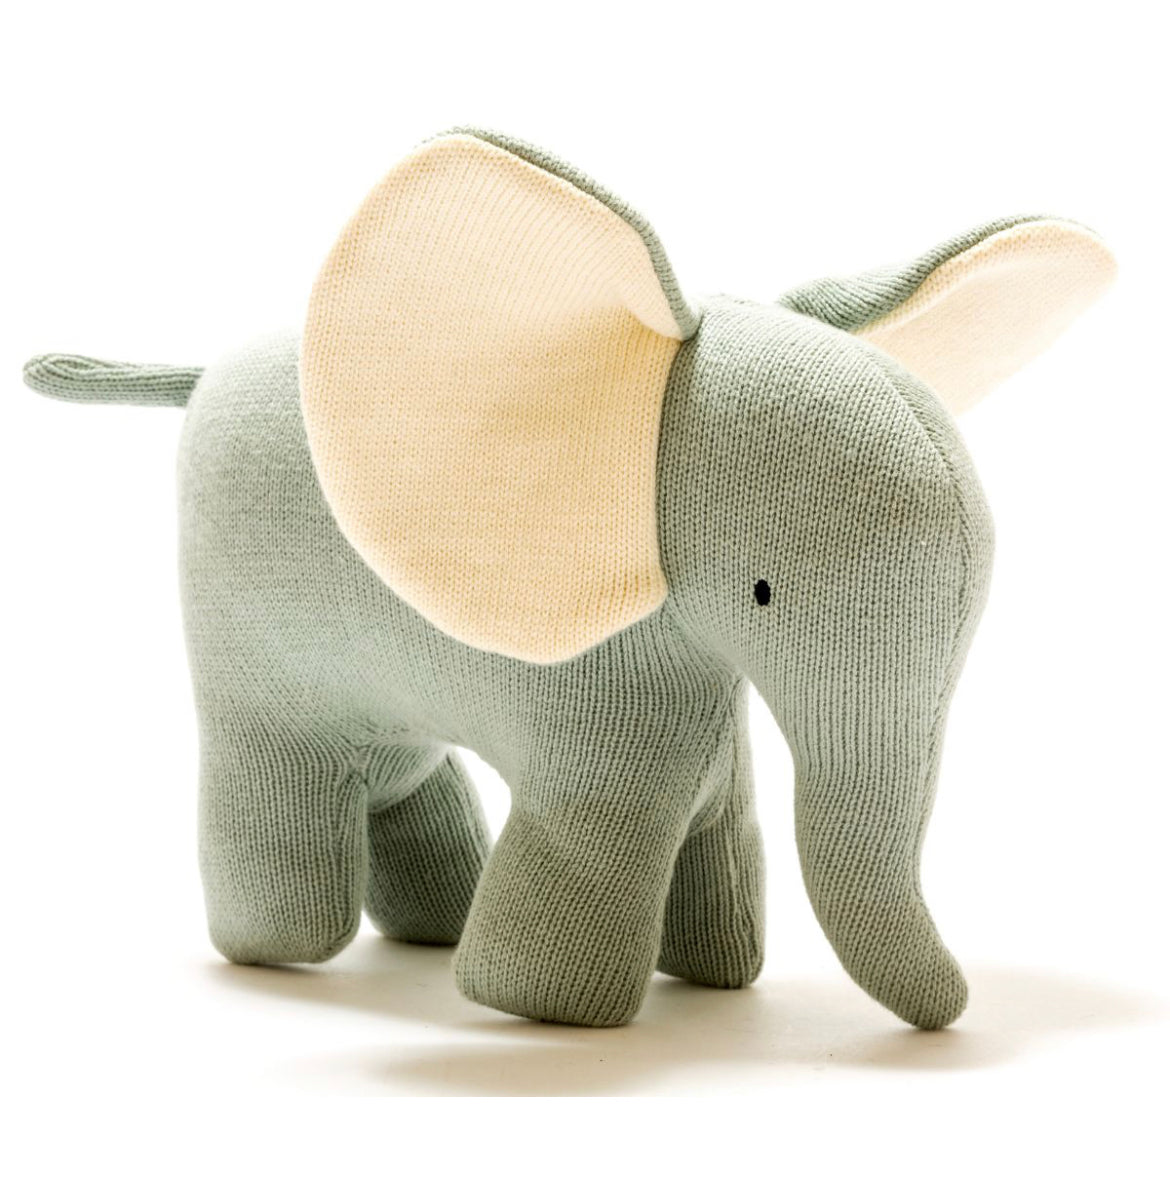 Best Years LTD Ellis the Elephant Plush Toy Knitted Organic Cotton Teal